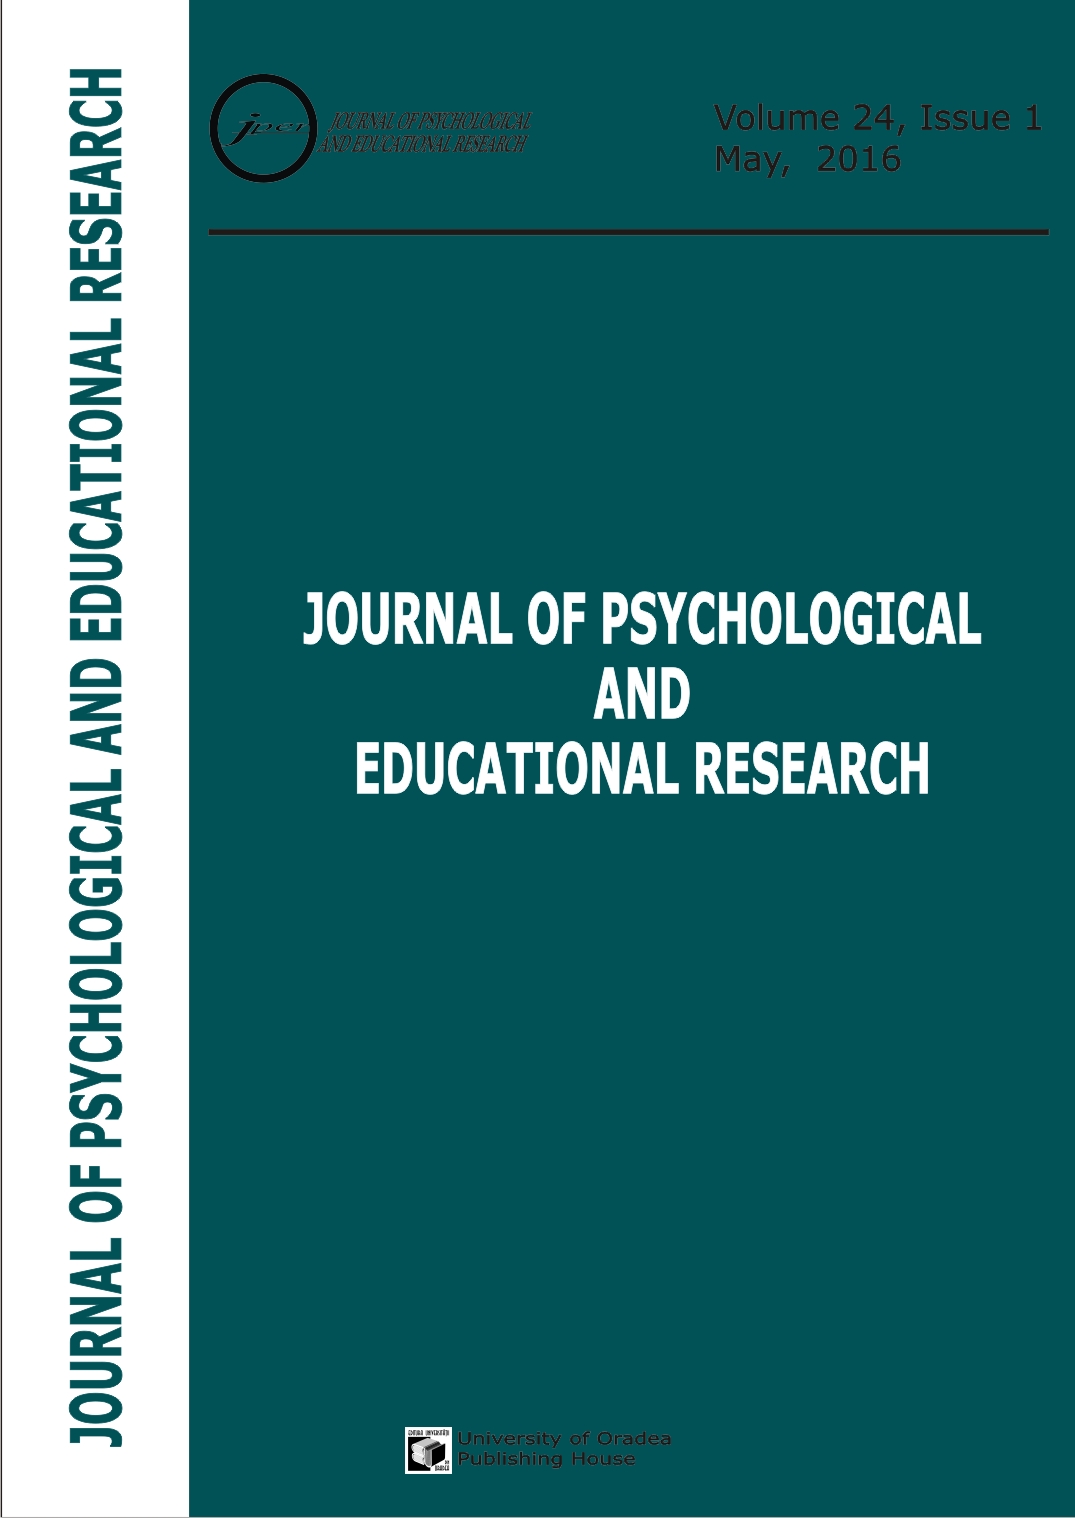 Mediating role examination of self-esteem on career decisiveness and career commitment; an empirical investigation on thai young adults Cover Image